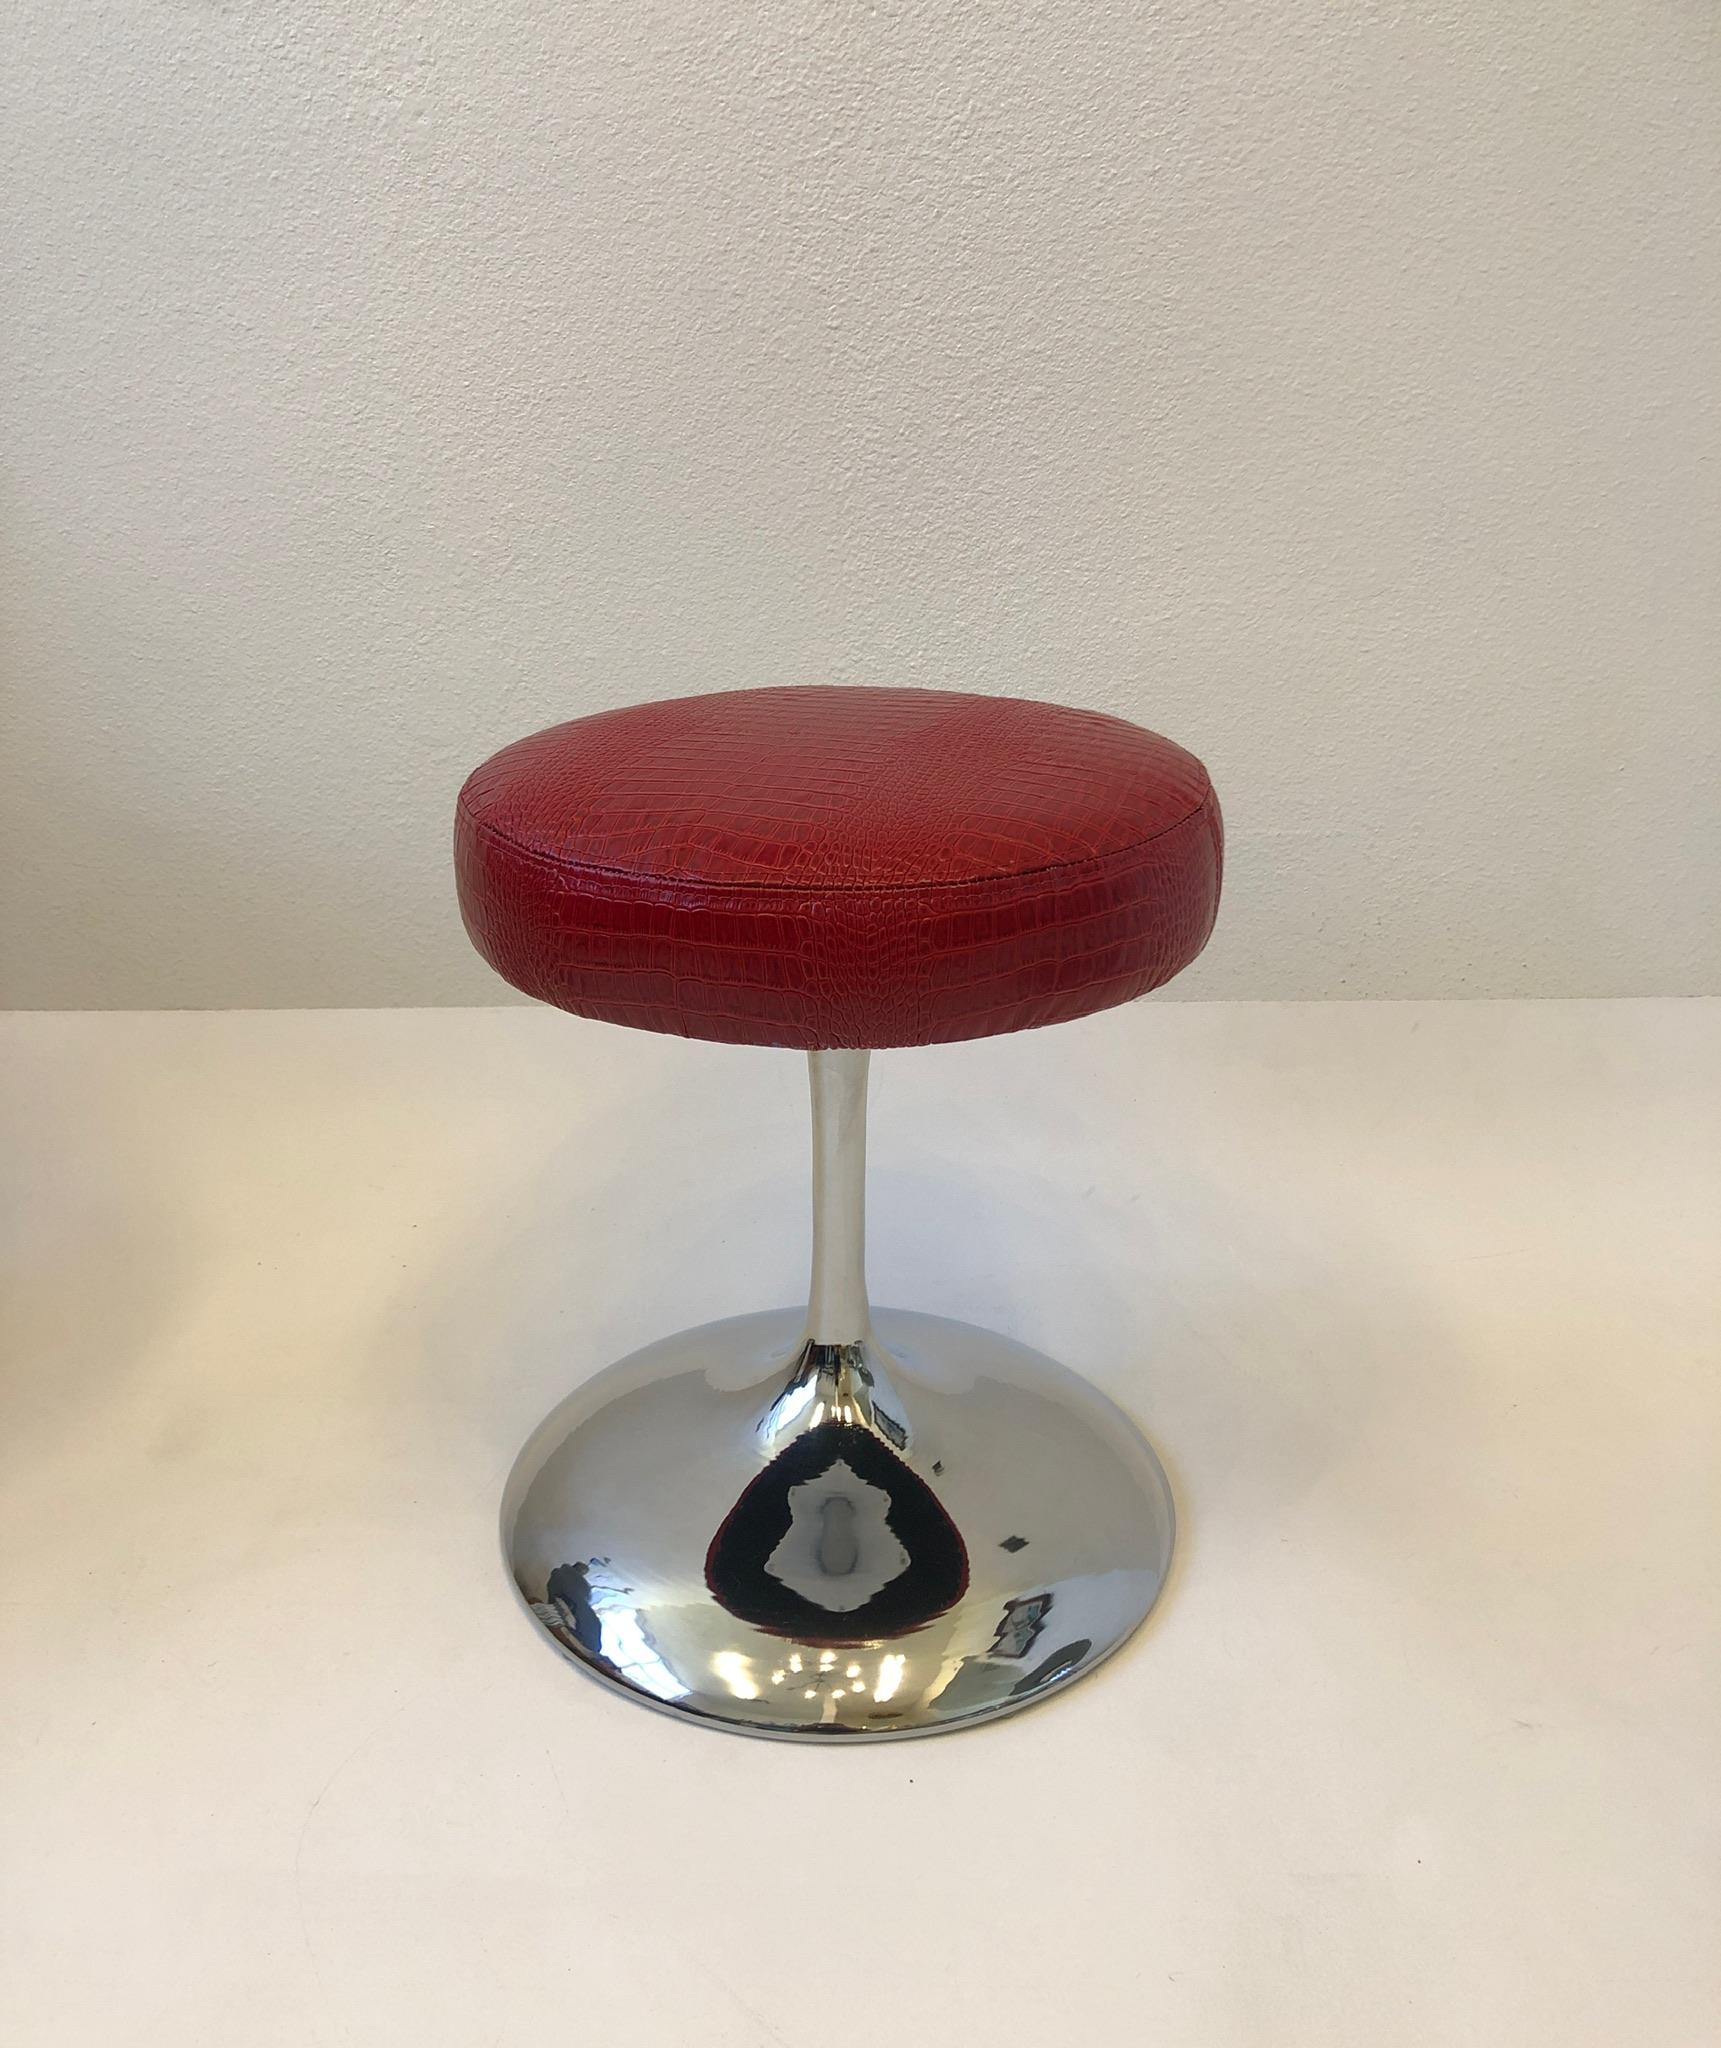 1970’s Polish chrome swivel stool with red Crocodile patent leather seat.
Newly recovered.
Measurements: 19” High, 16” Diameter.